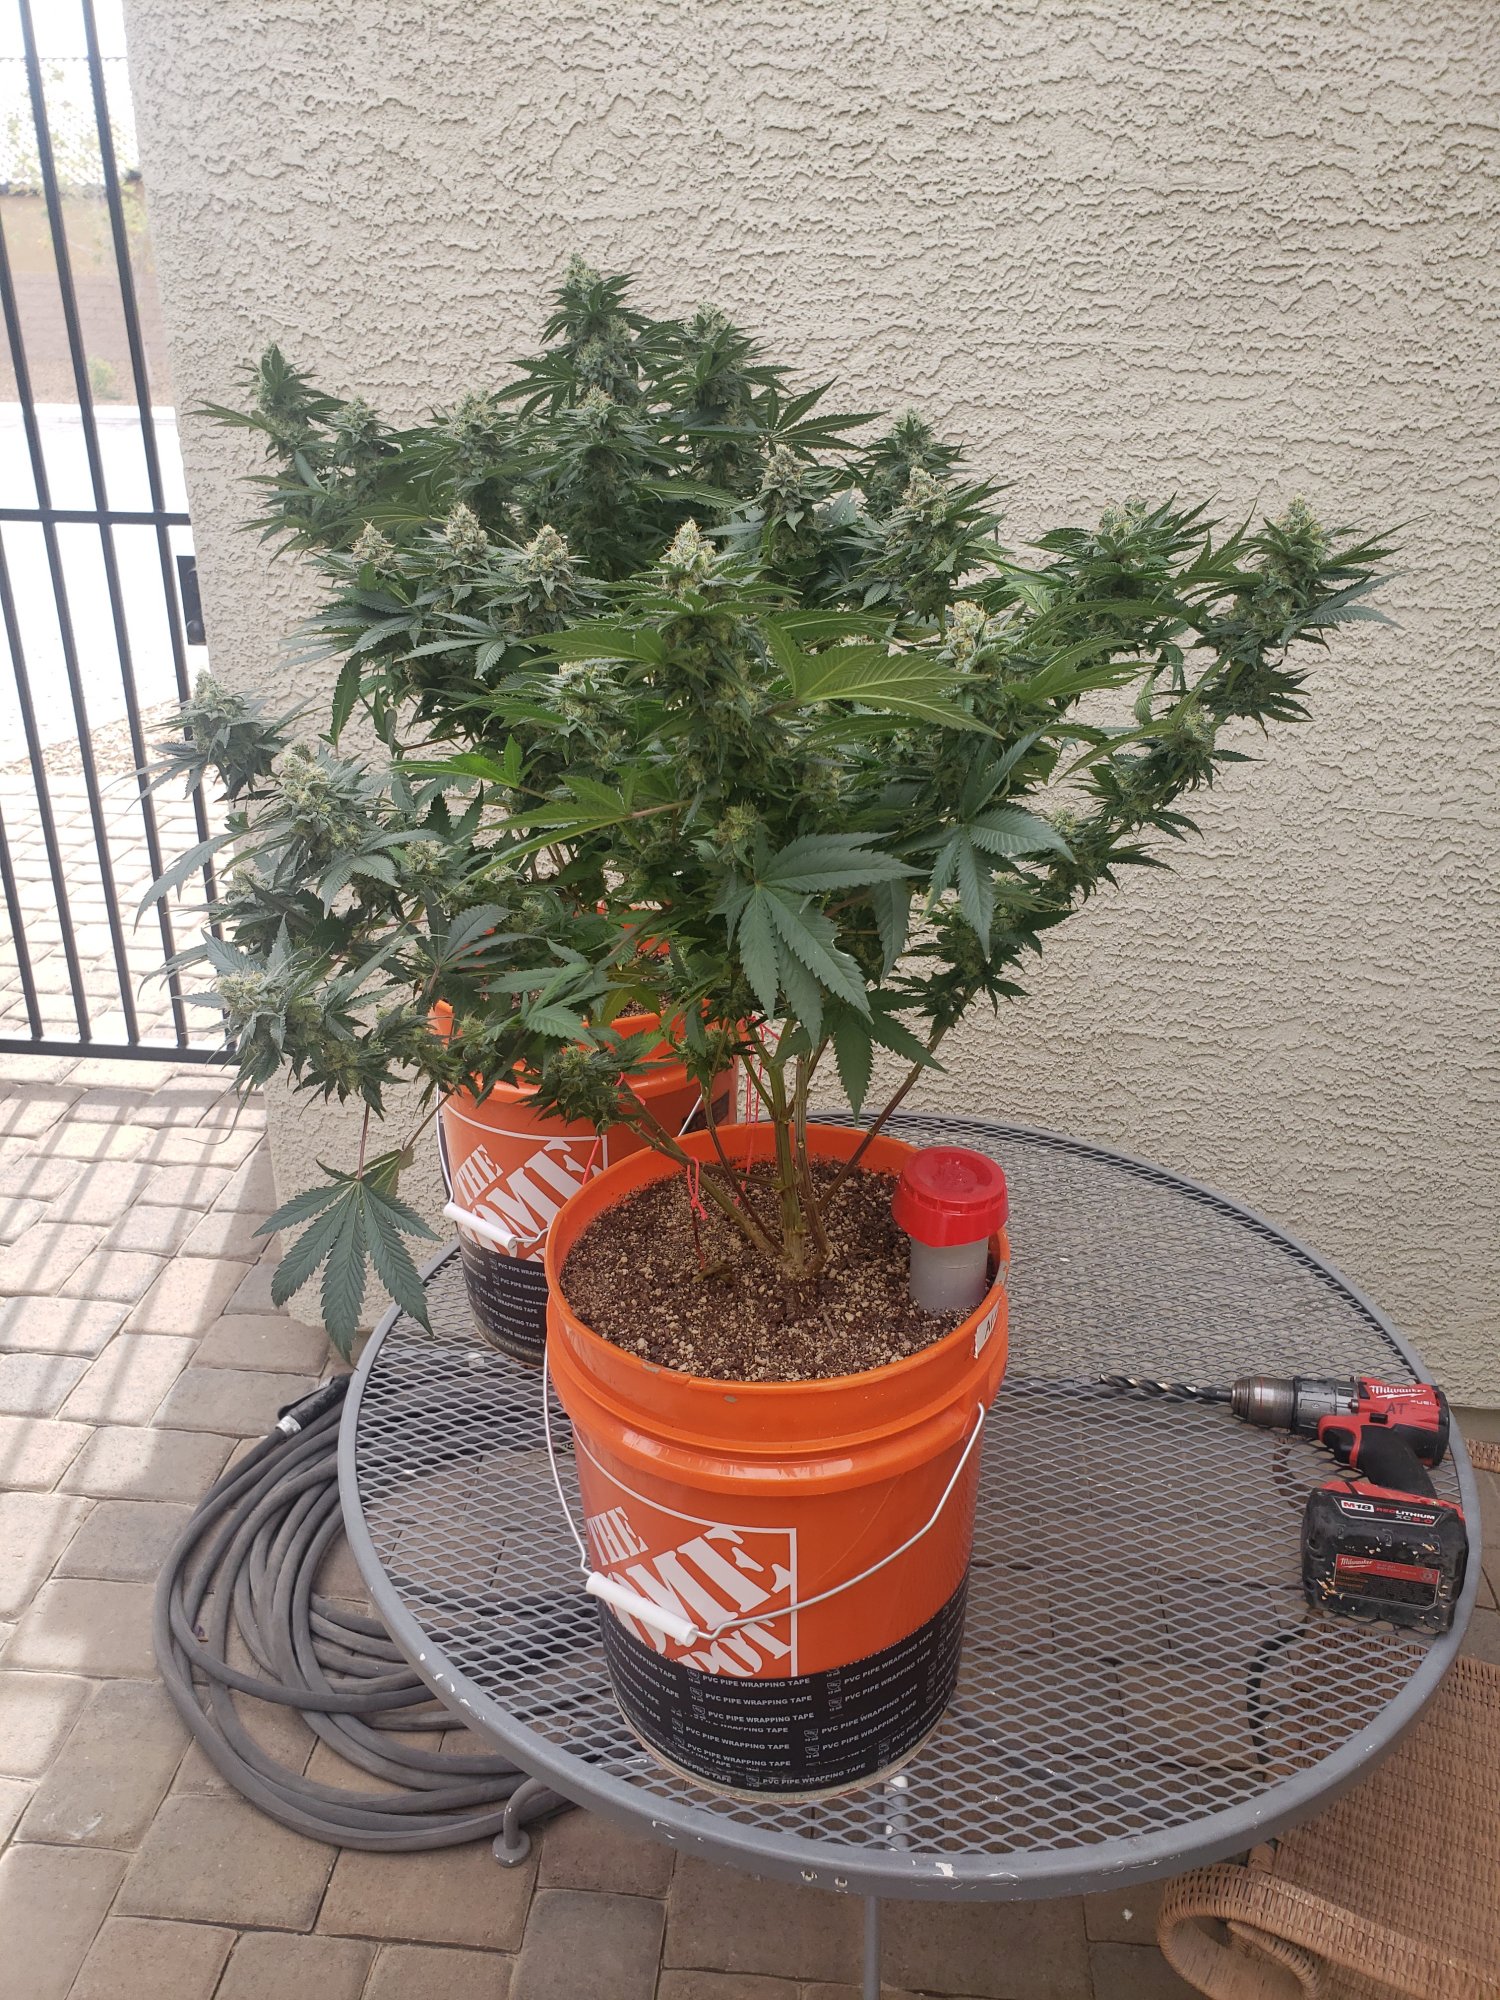 What do you think 1st grow in many years and second overall 4